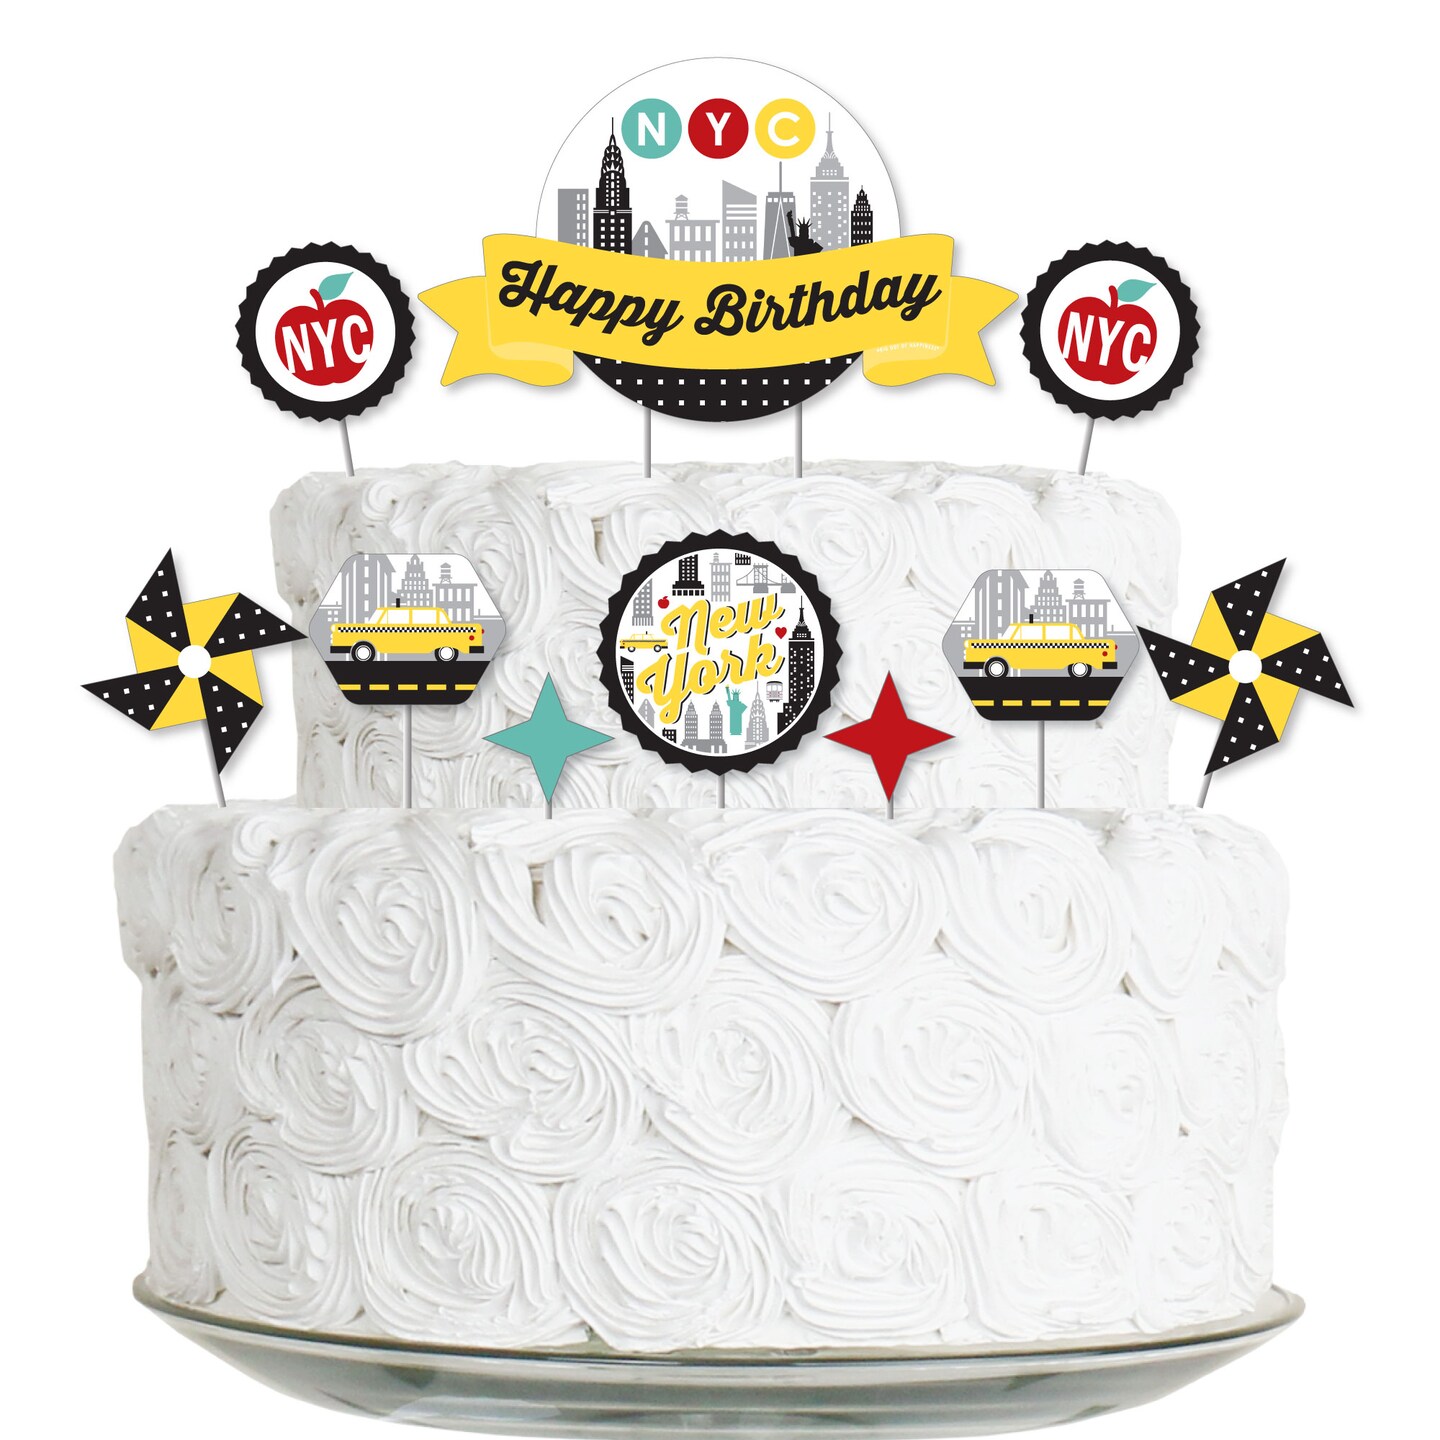 Online Cake Delivery in Manwath - 50% Off - Now Rs 349 | IndiaCakes